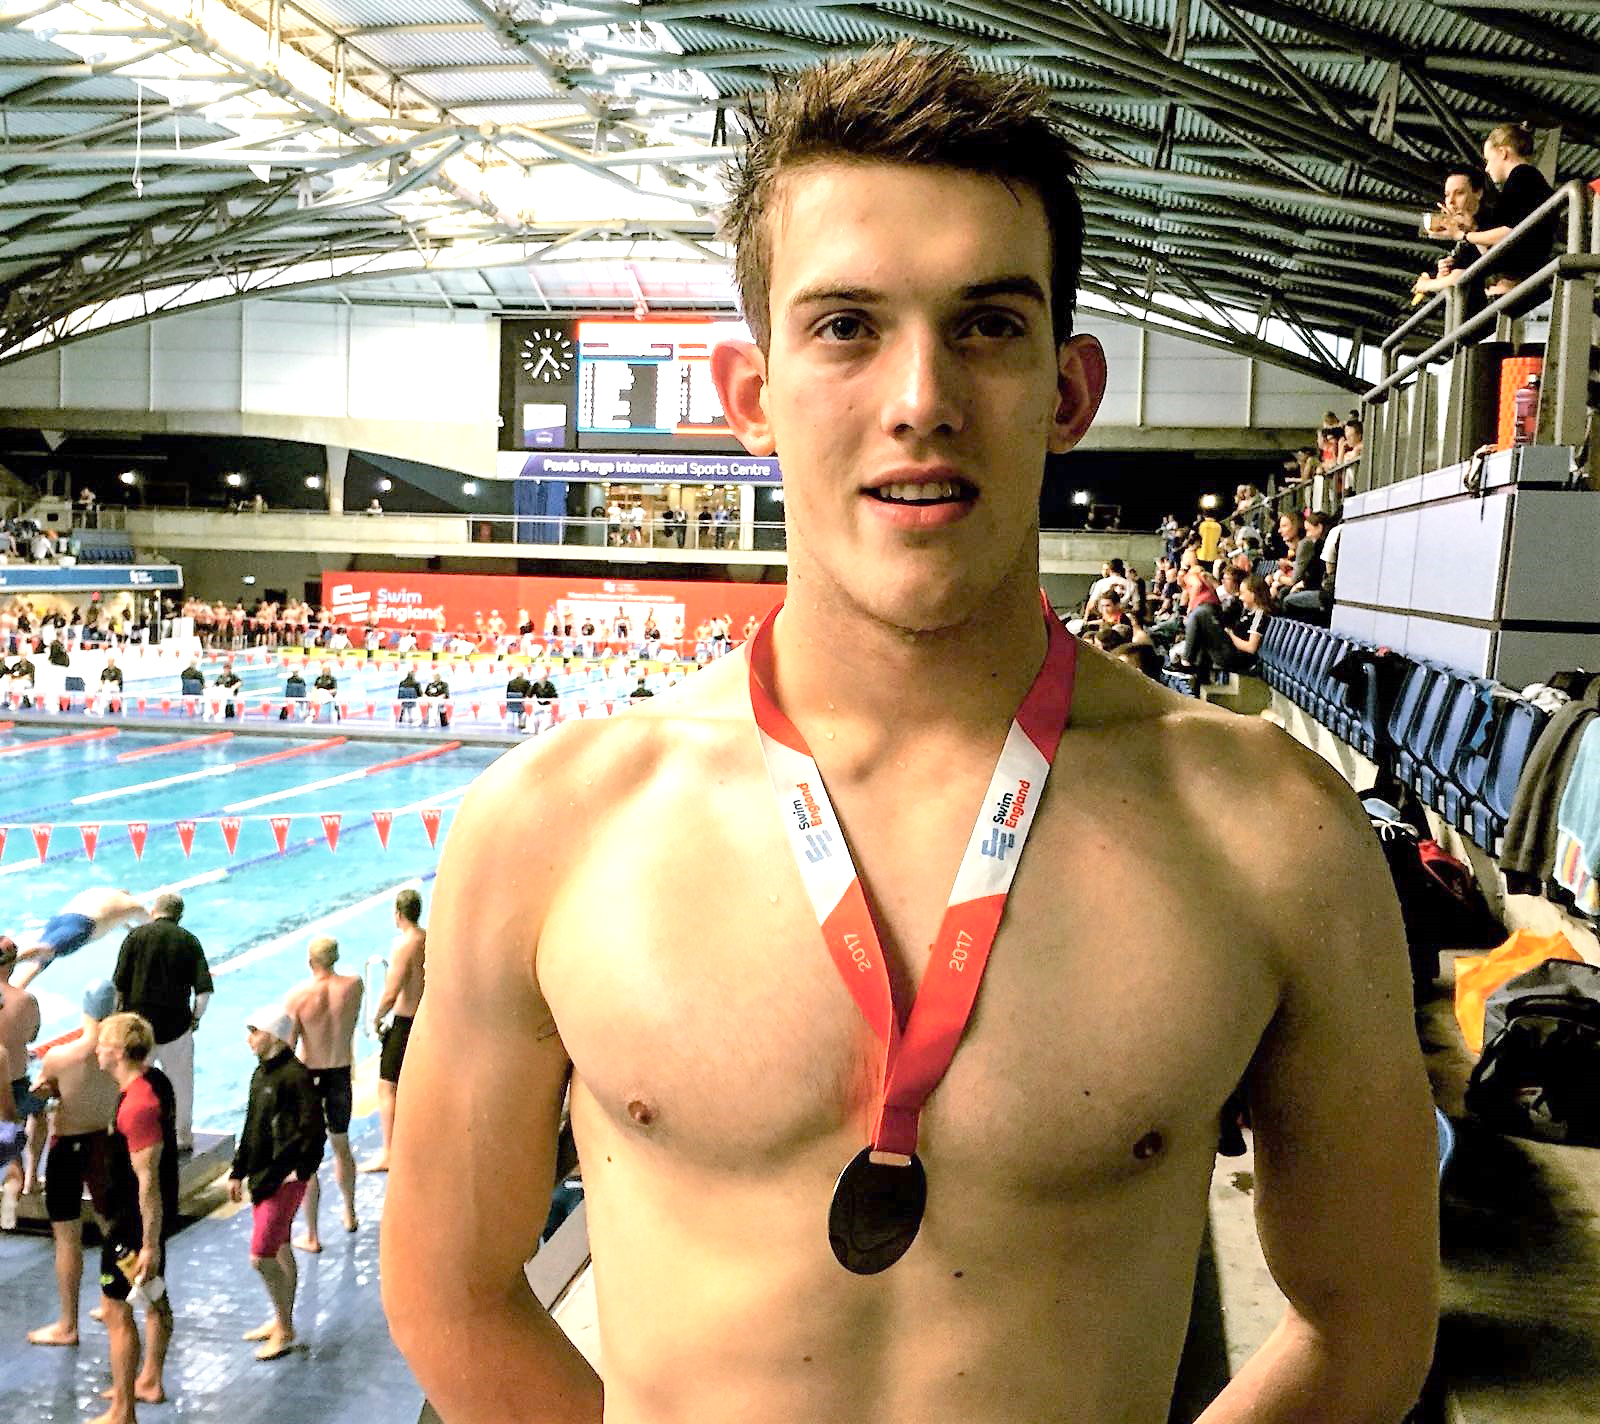 Aycliffe Club Member in International Swimming Competition